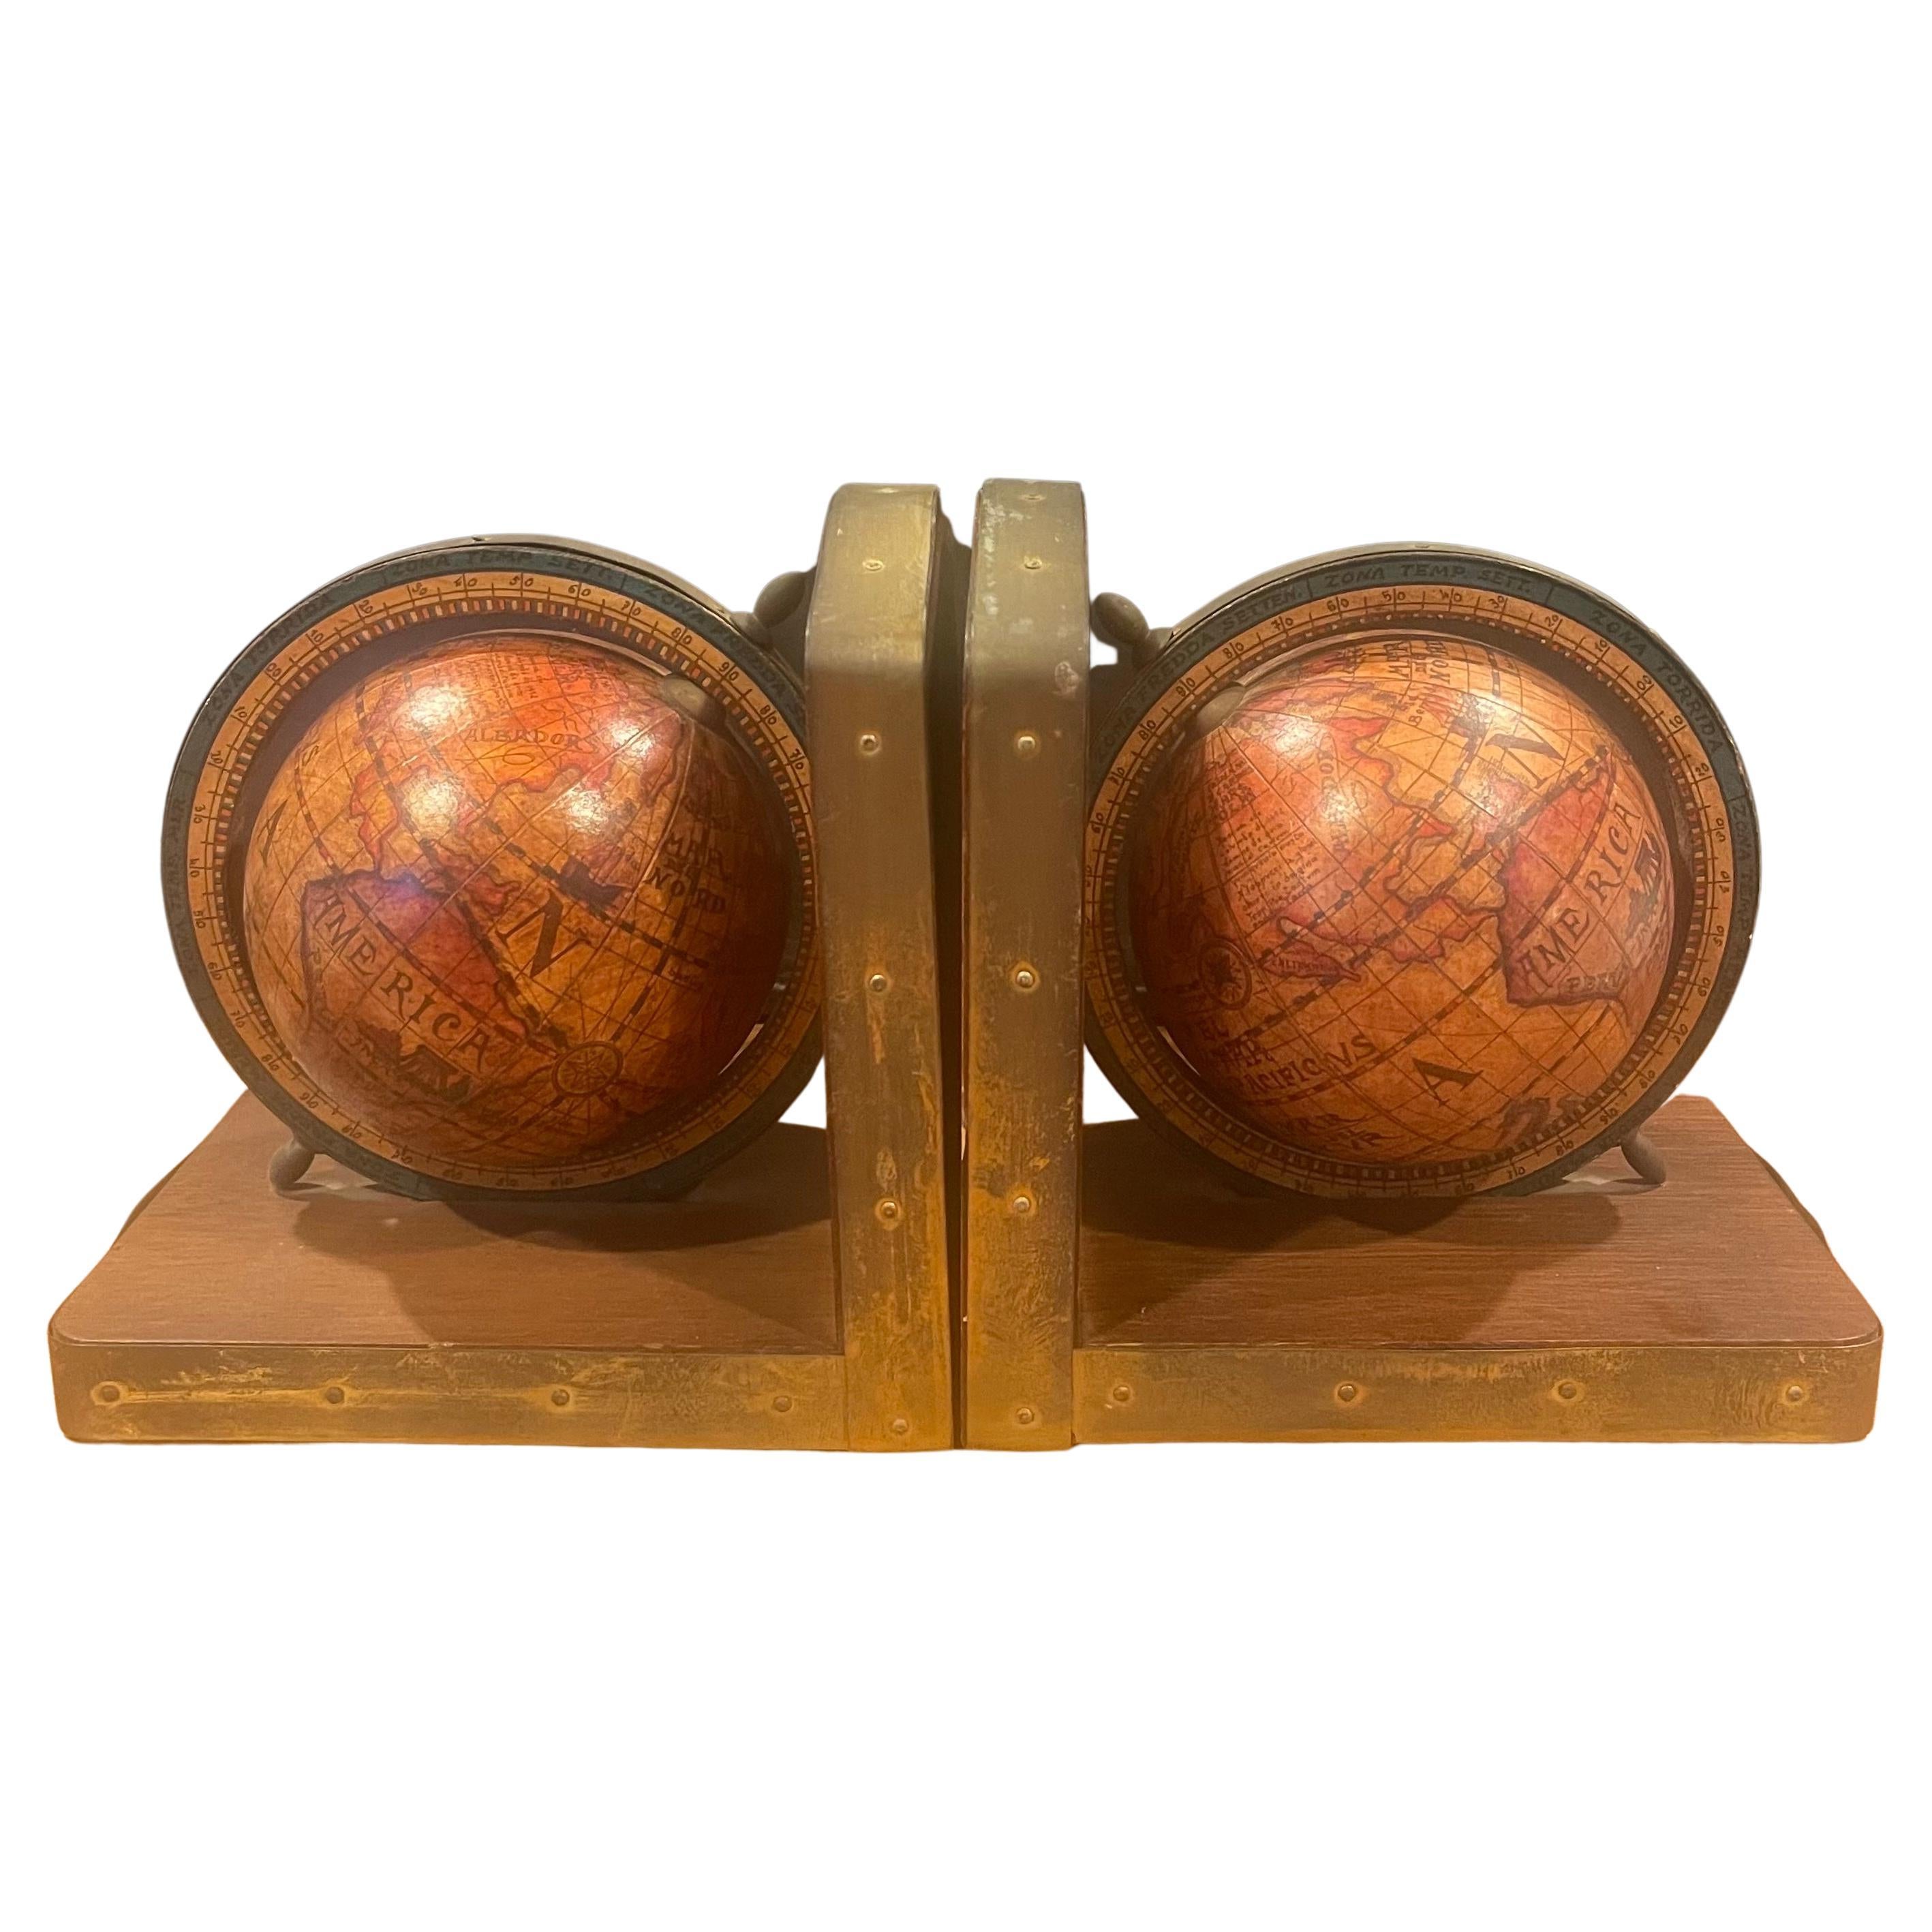 Pair of Italian "Old World" Style Globe Bookends on Wood Bases